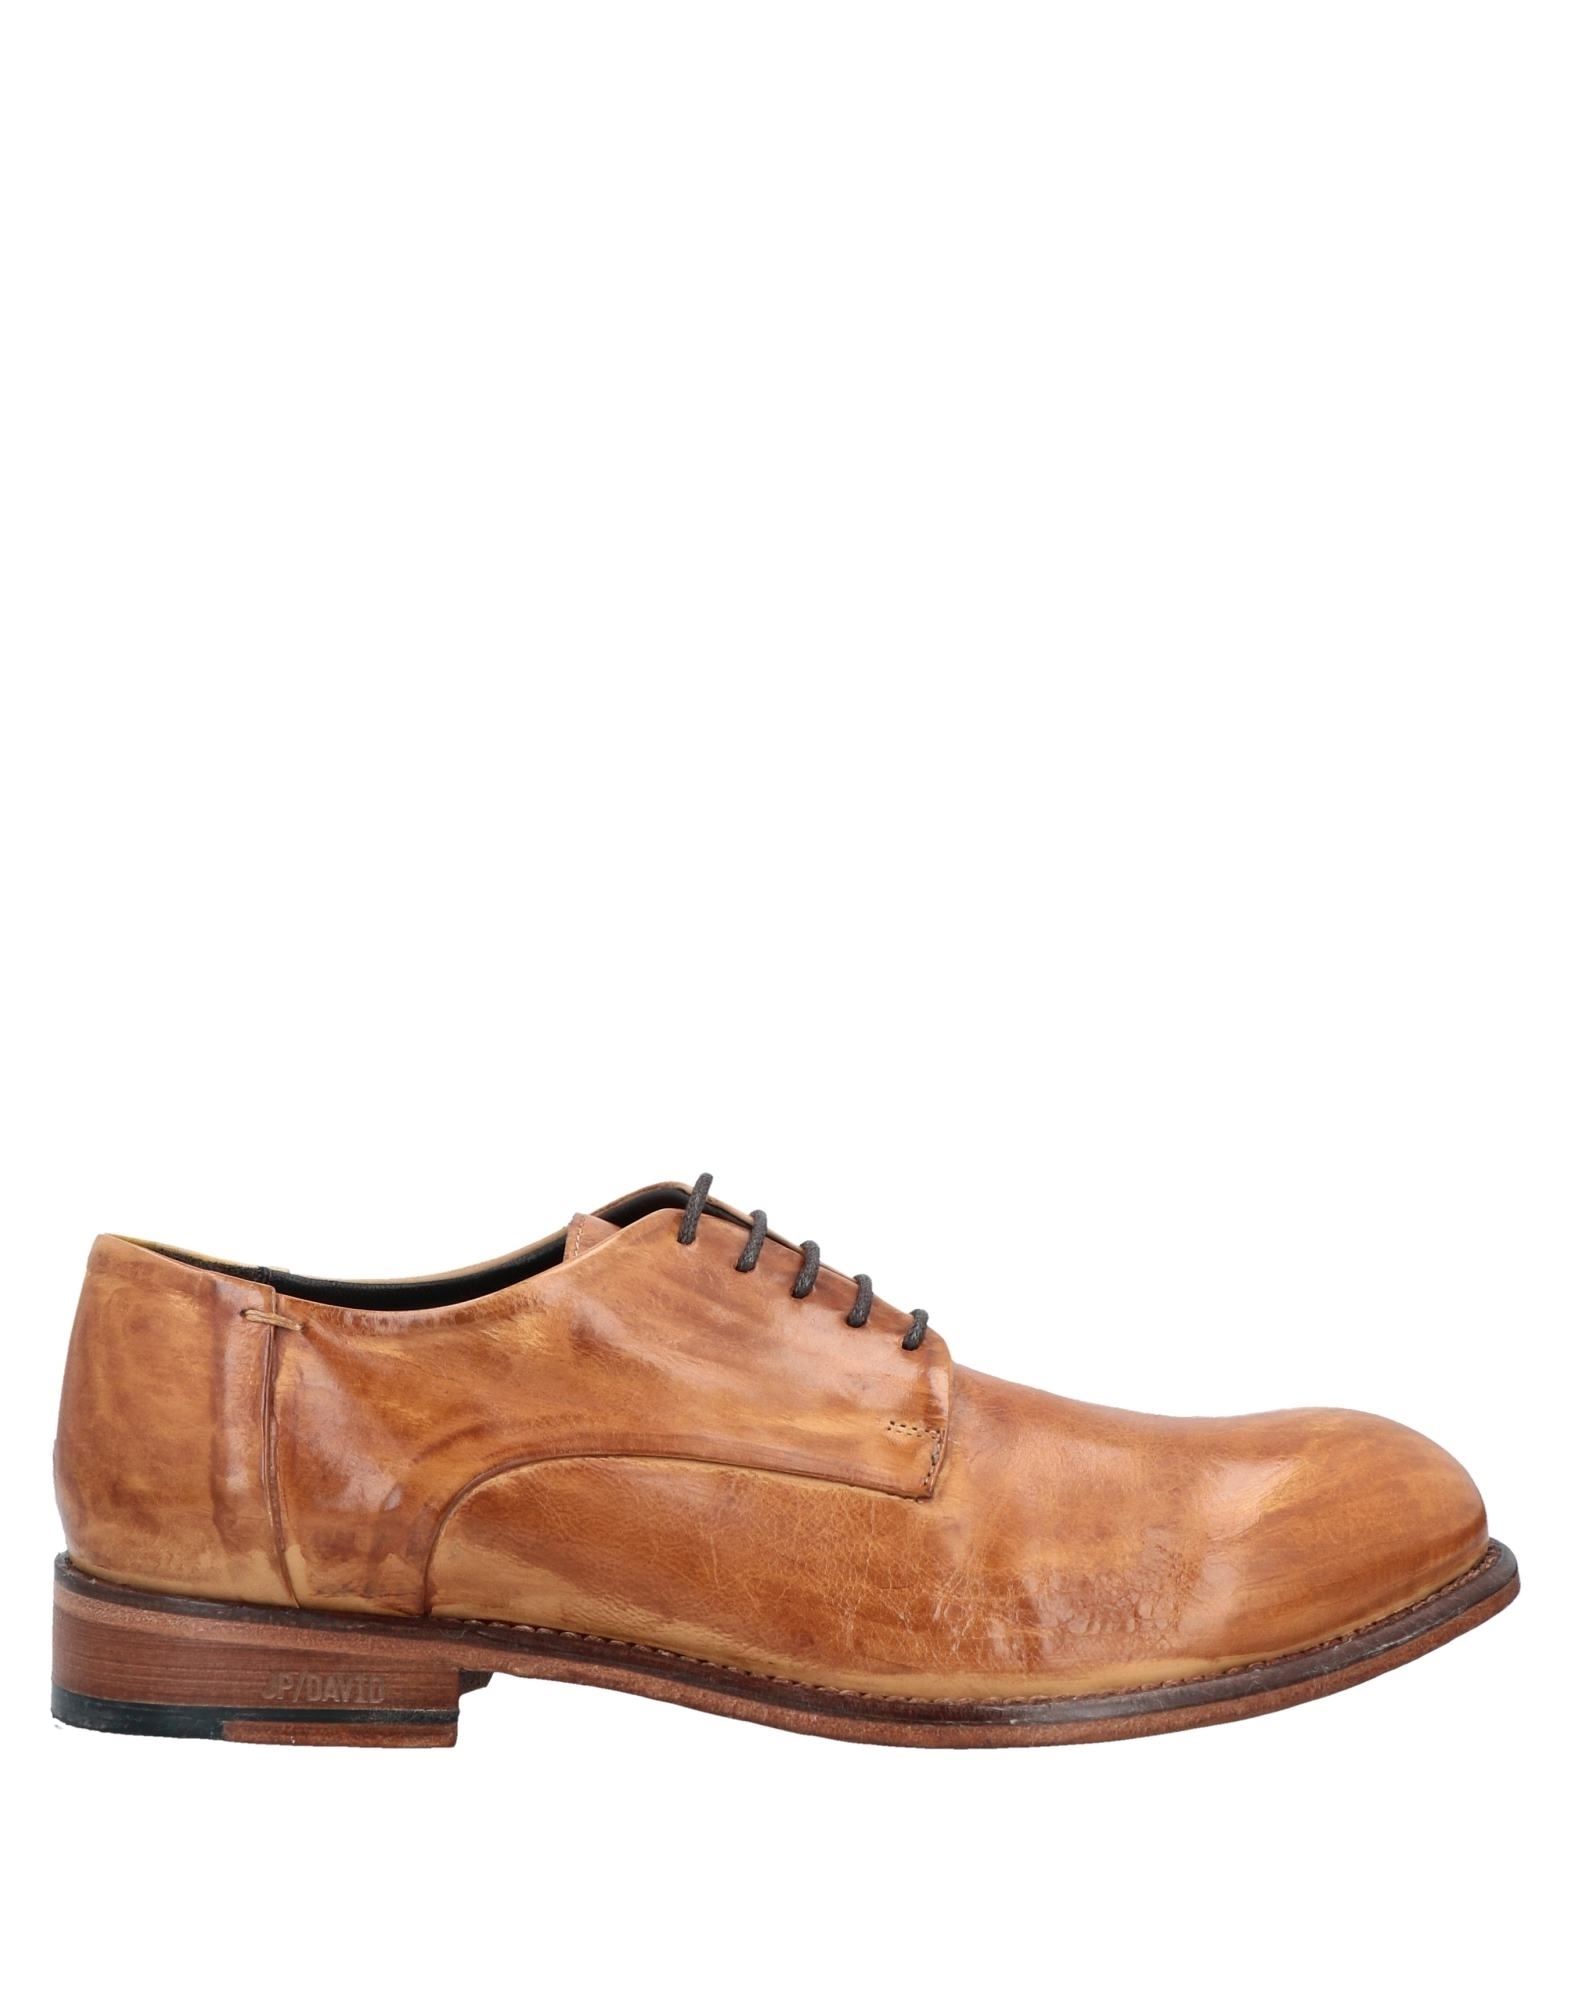 Jp/david Lace-up Shoes In Tan